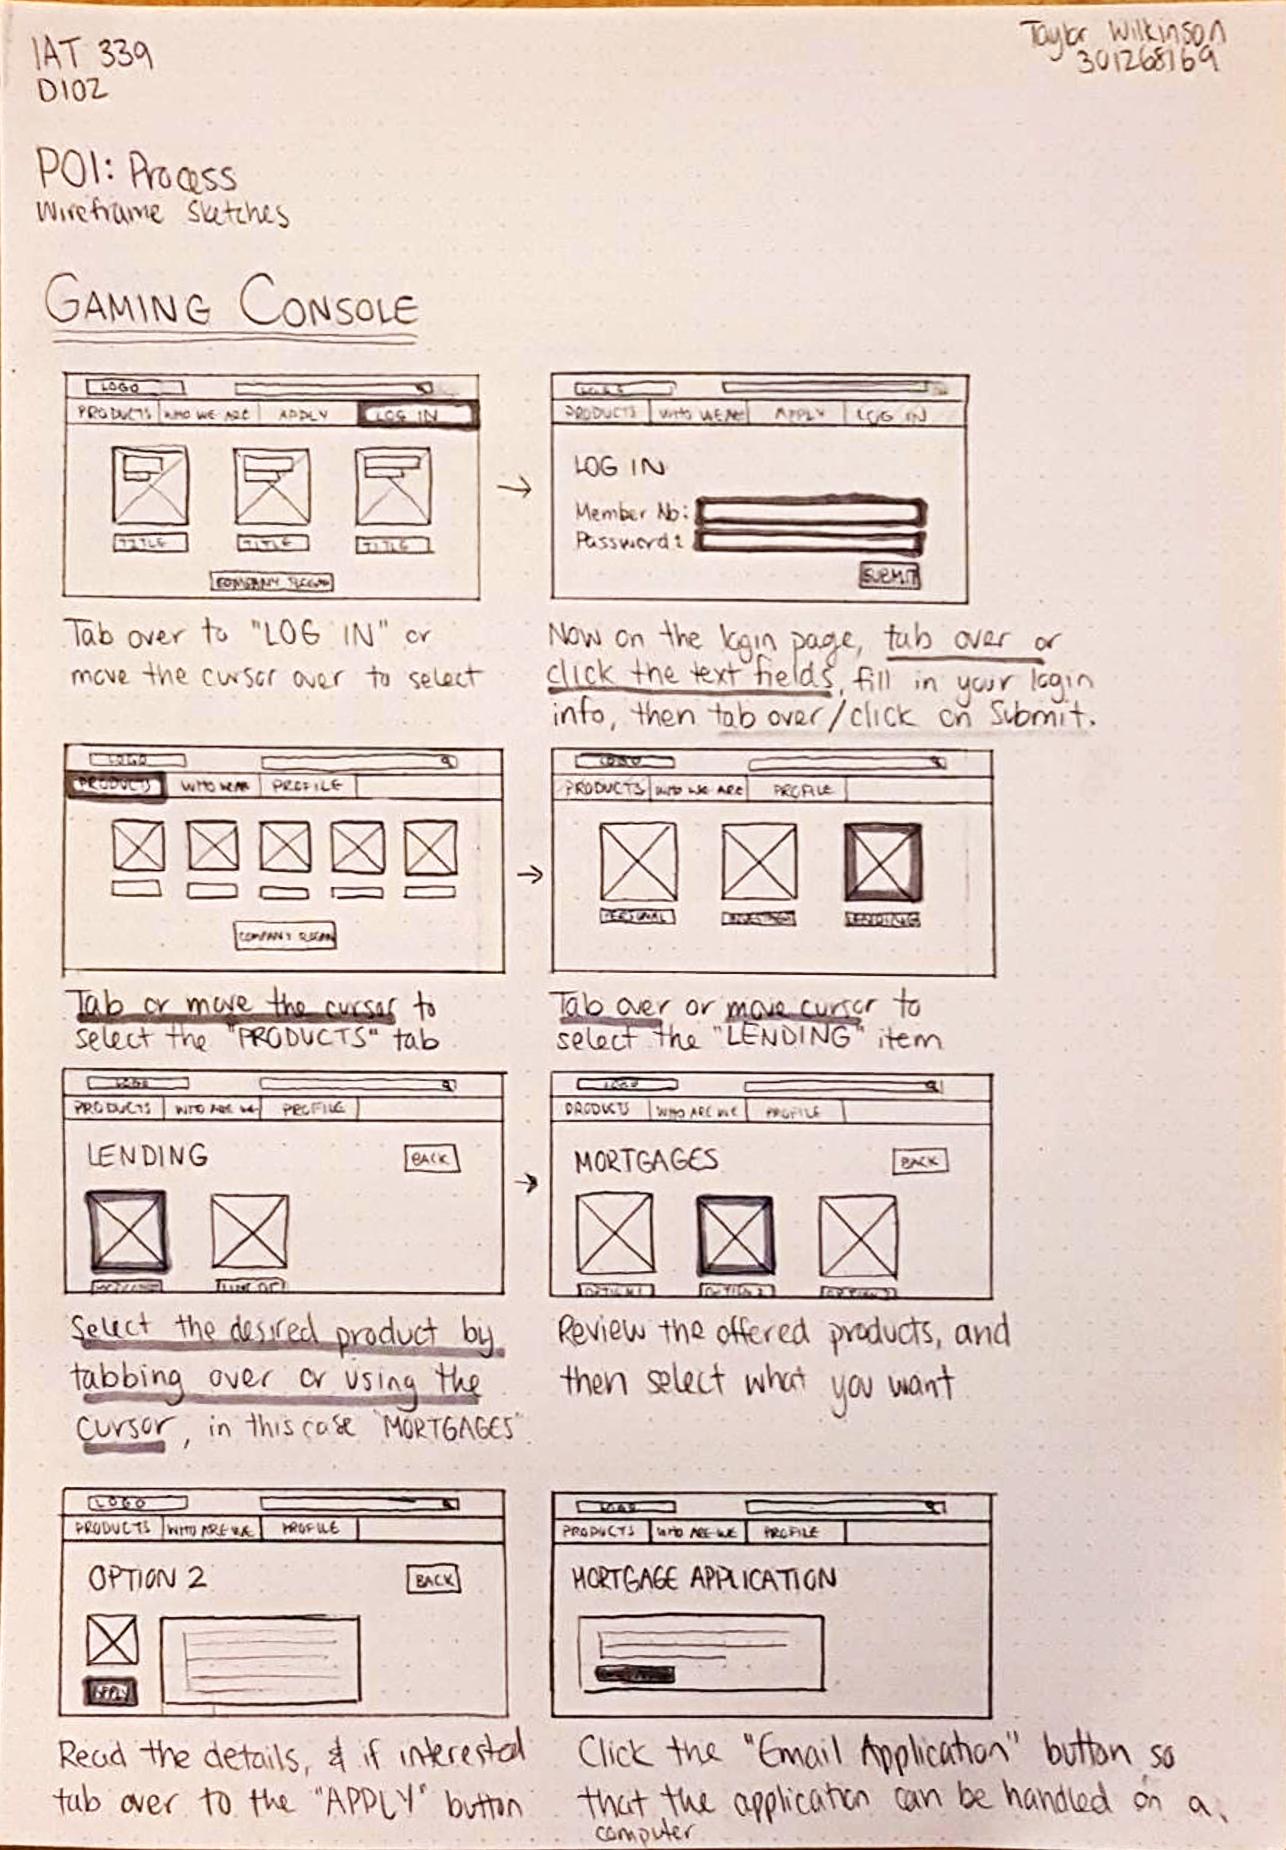 Userflow sketches for console